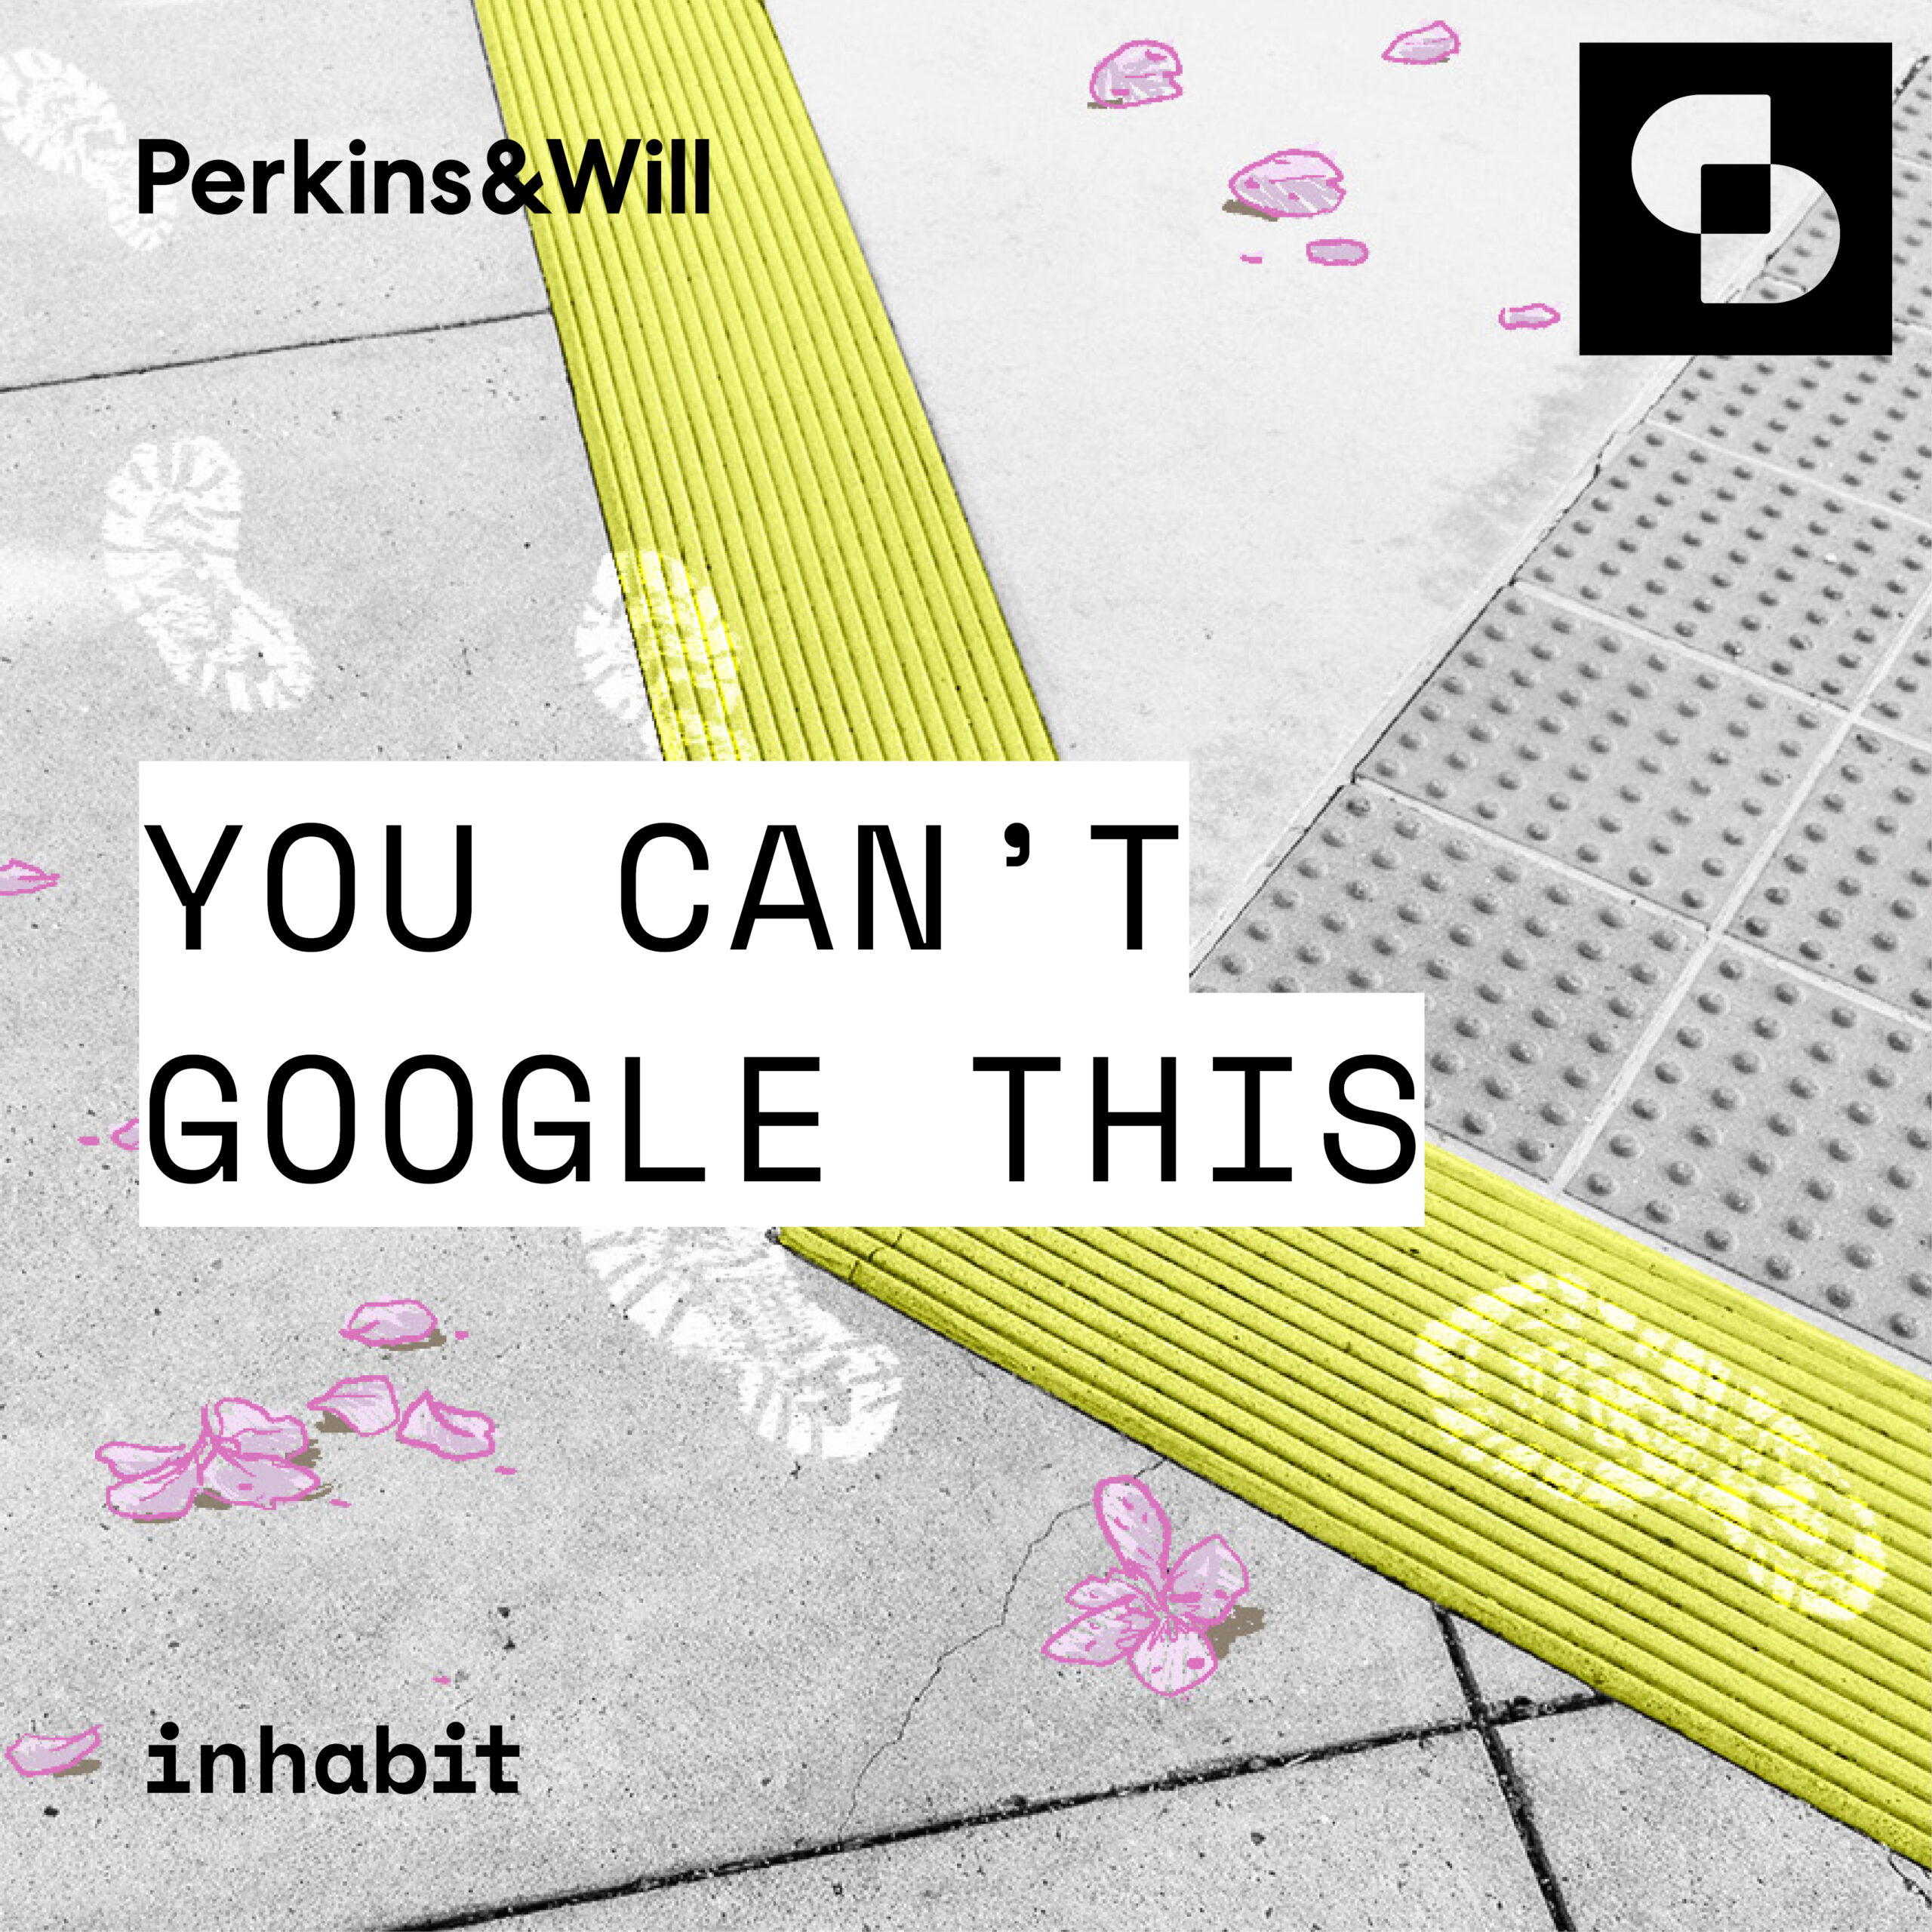 Cover art for Inhabit Series 3 "You Can't Google This": gray sidewalk with tactile paving, cherry blossoms, and white sneaker footprints.